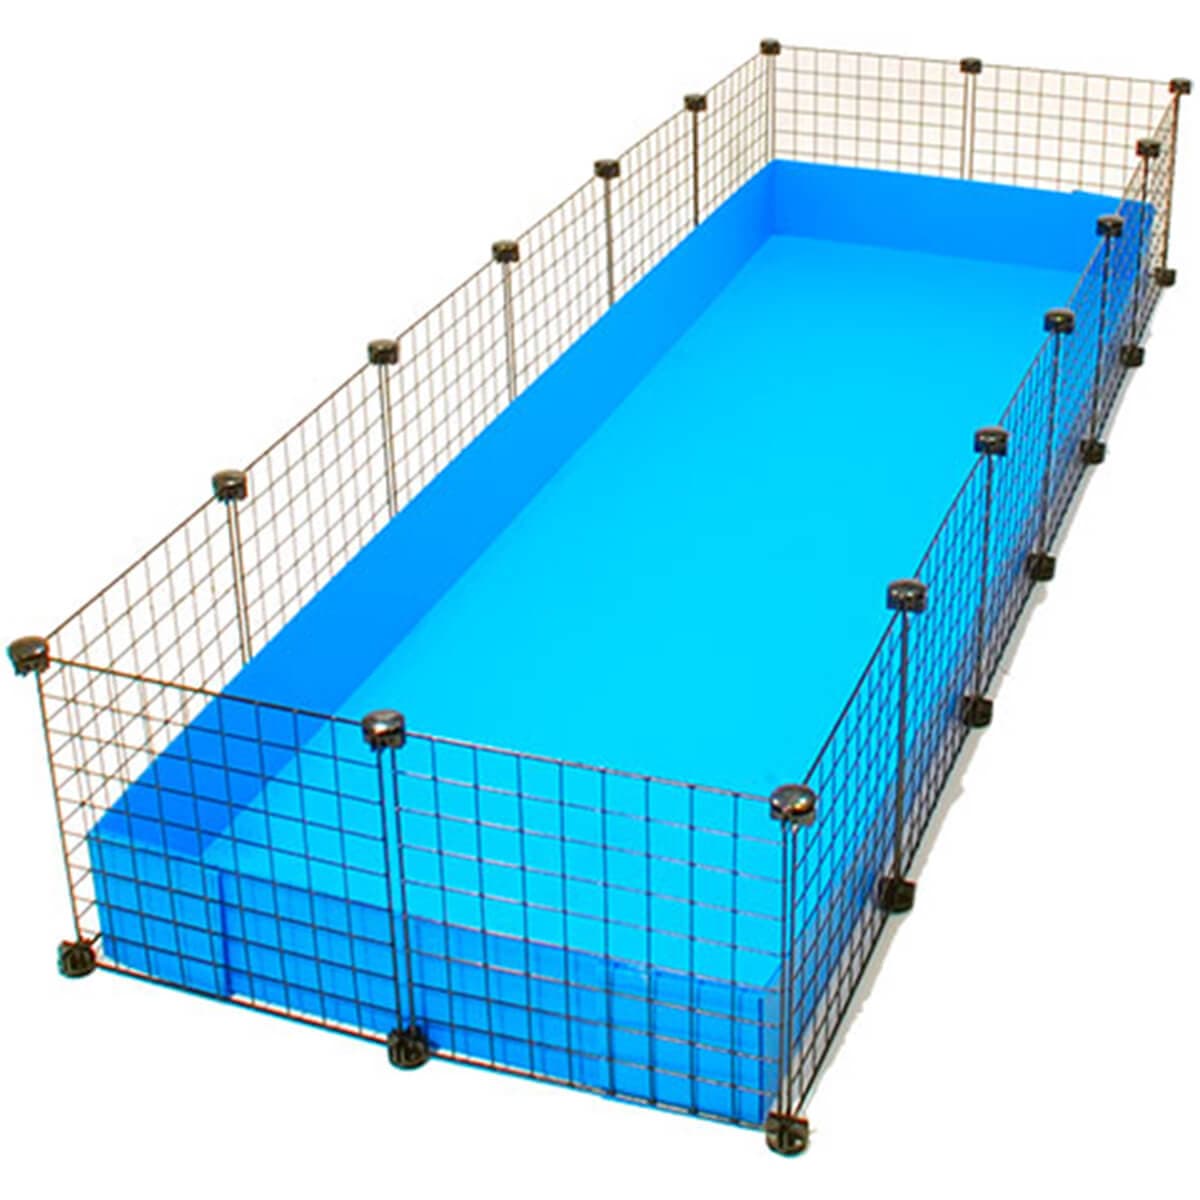 Jumbo light blue C&C guinea pig cage with black grids and connectors